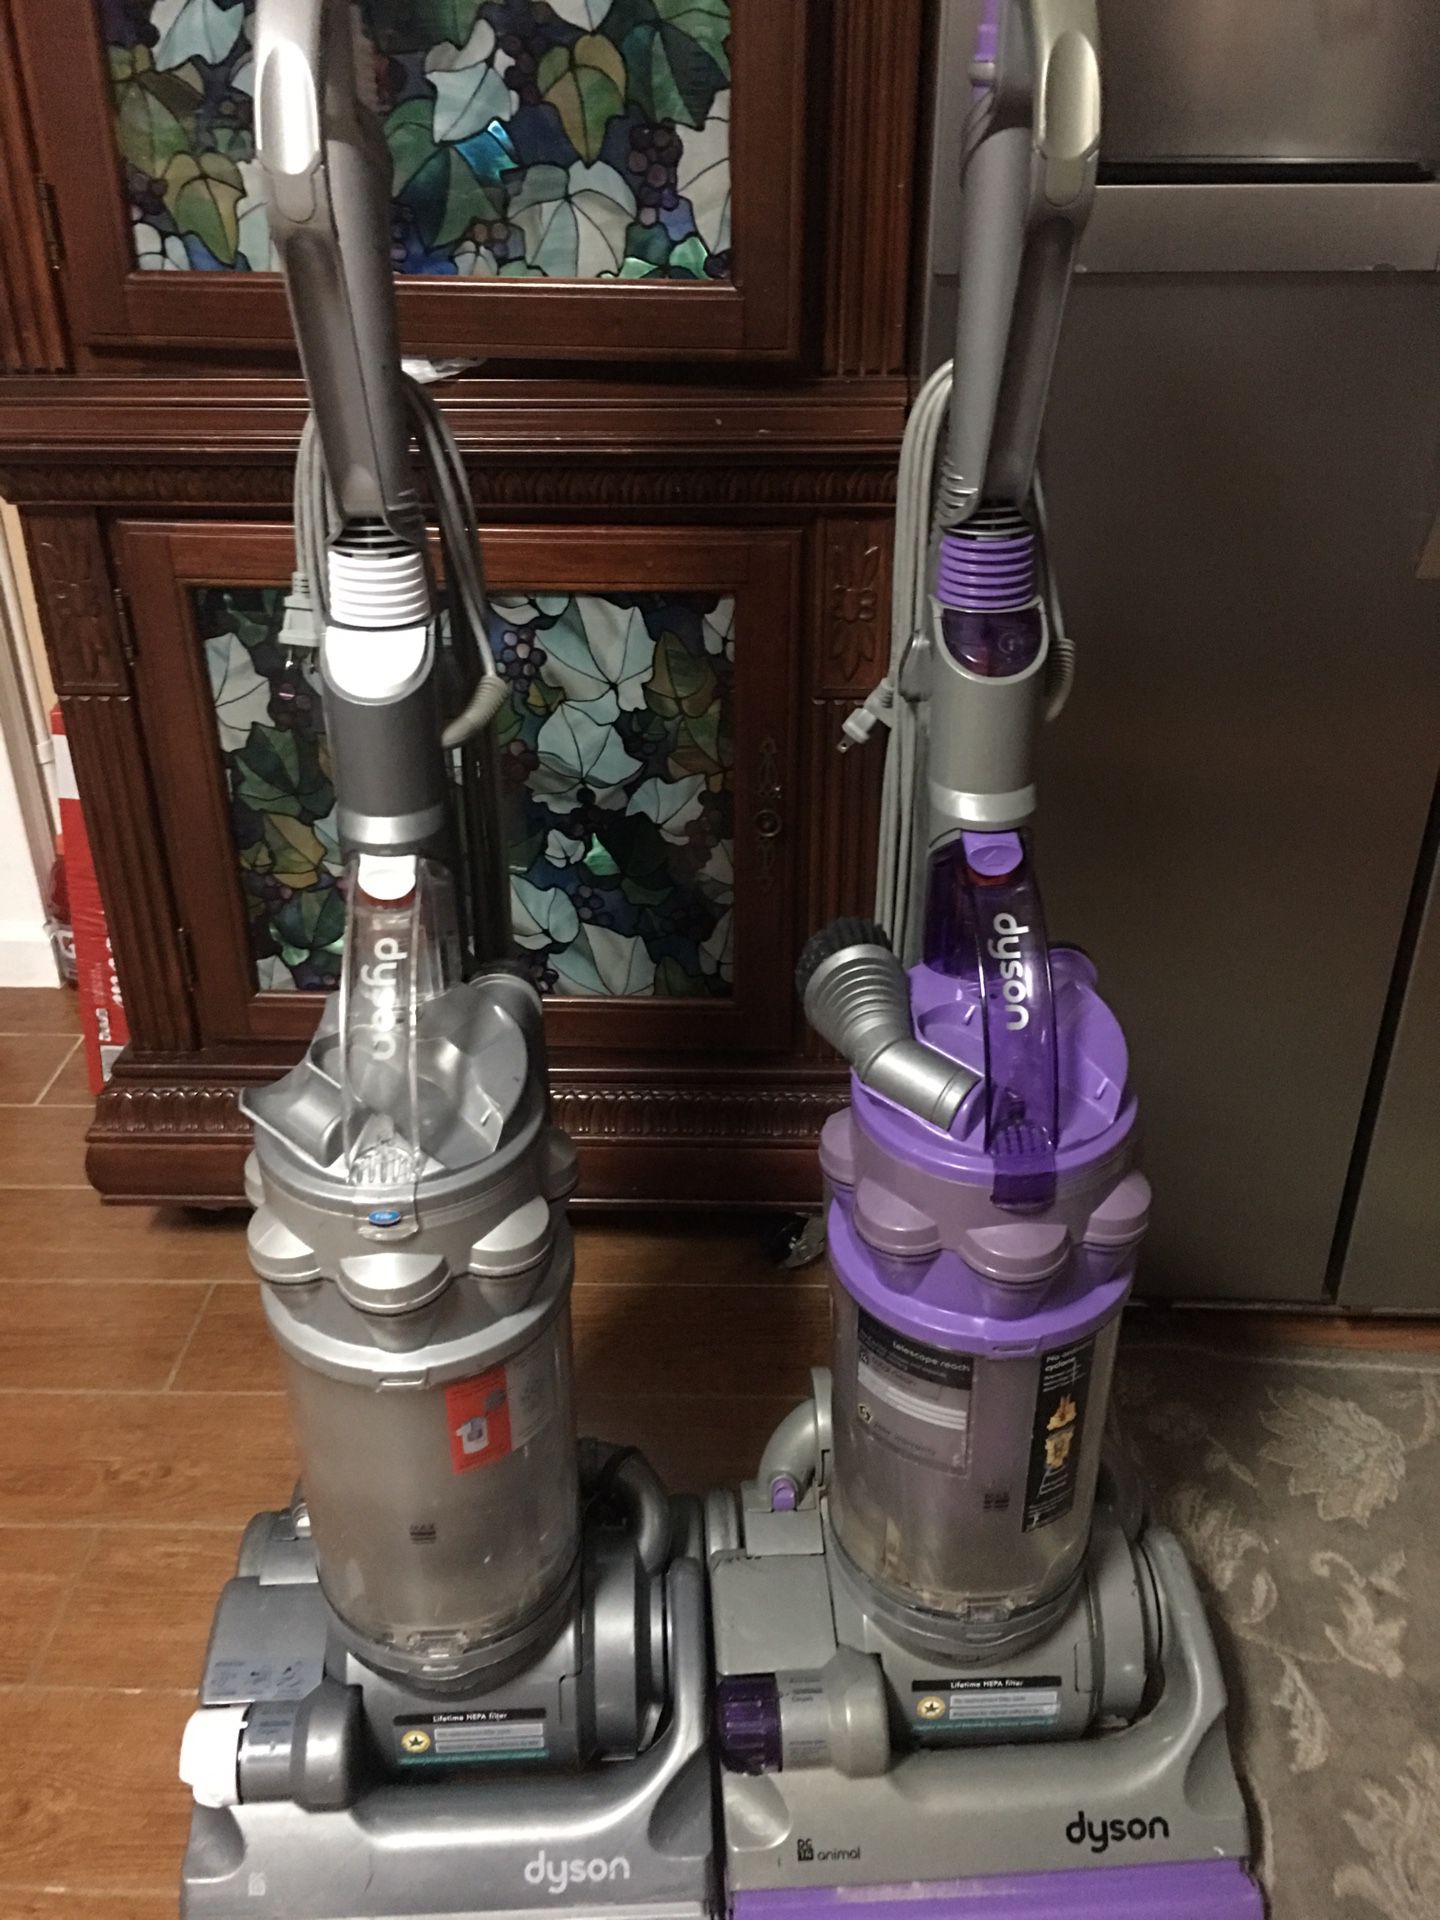 Dyson good condition $100 for both